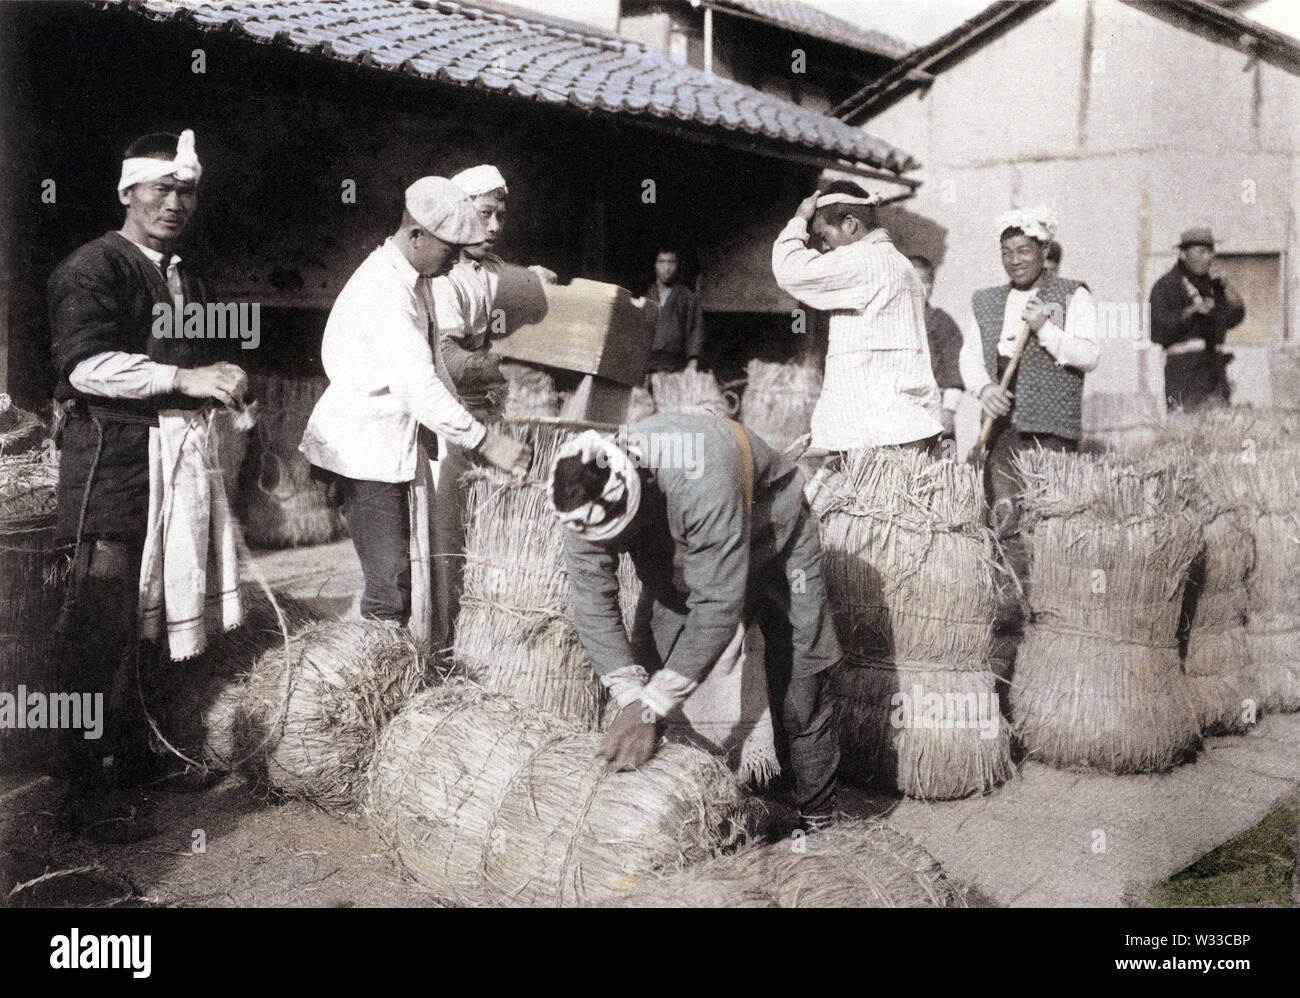 [ 1900s Japan - Japanese Workers Packing Rice ] —   Rice cultivation in Japan: Packing rice. This image comes from “The Rice in Japan,” published in 1907 (Meiji 40) by Kobe based photographer Teijiro Takagi.  13 of 19  20th century vintage collotype print. Stock Photo